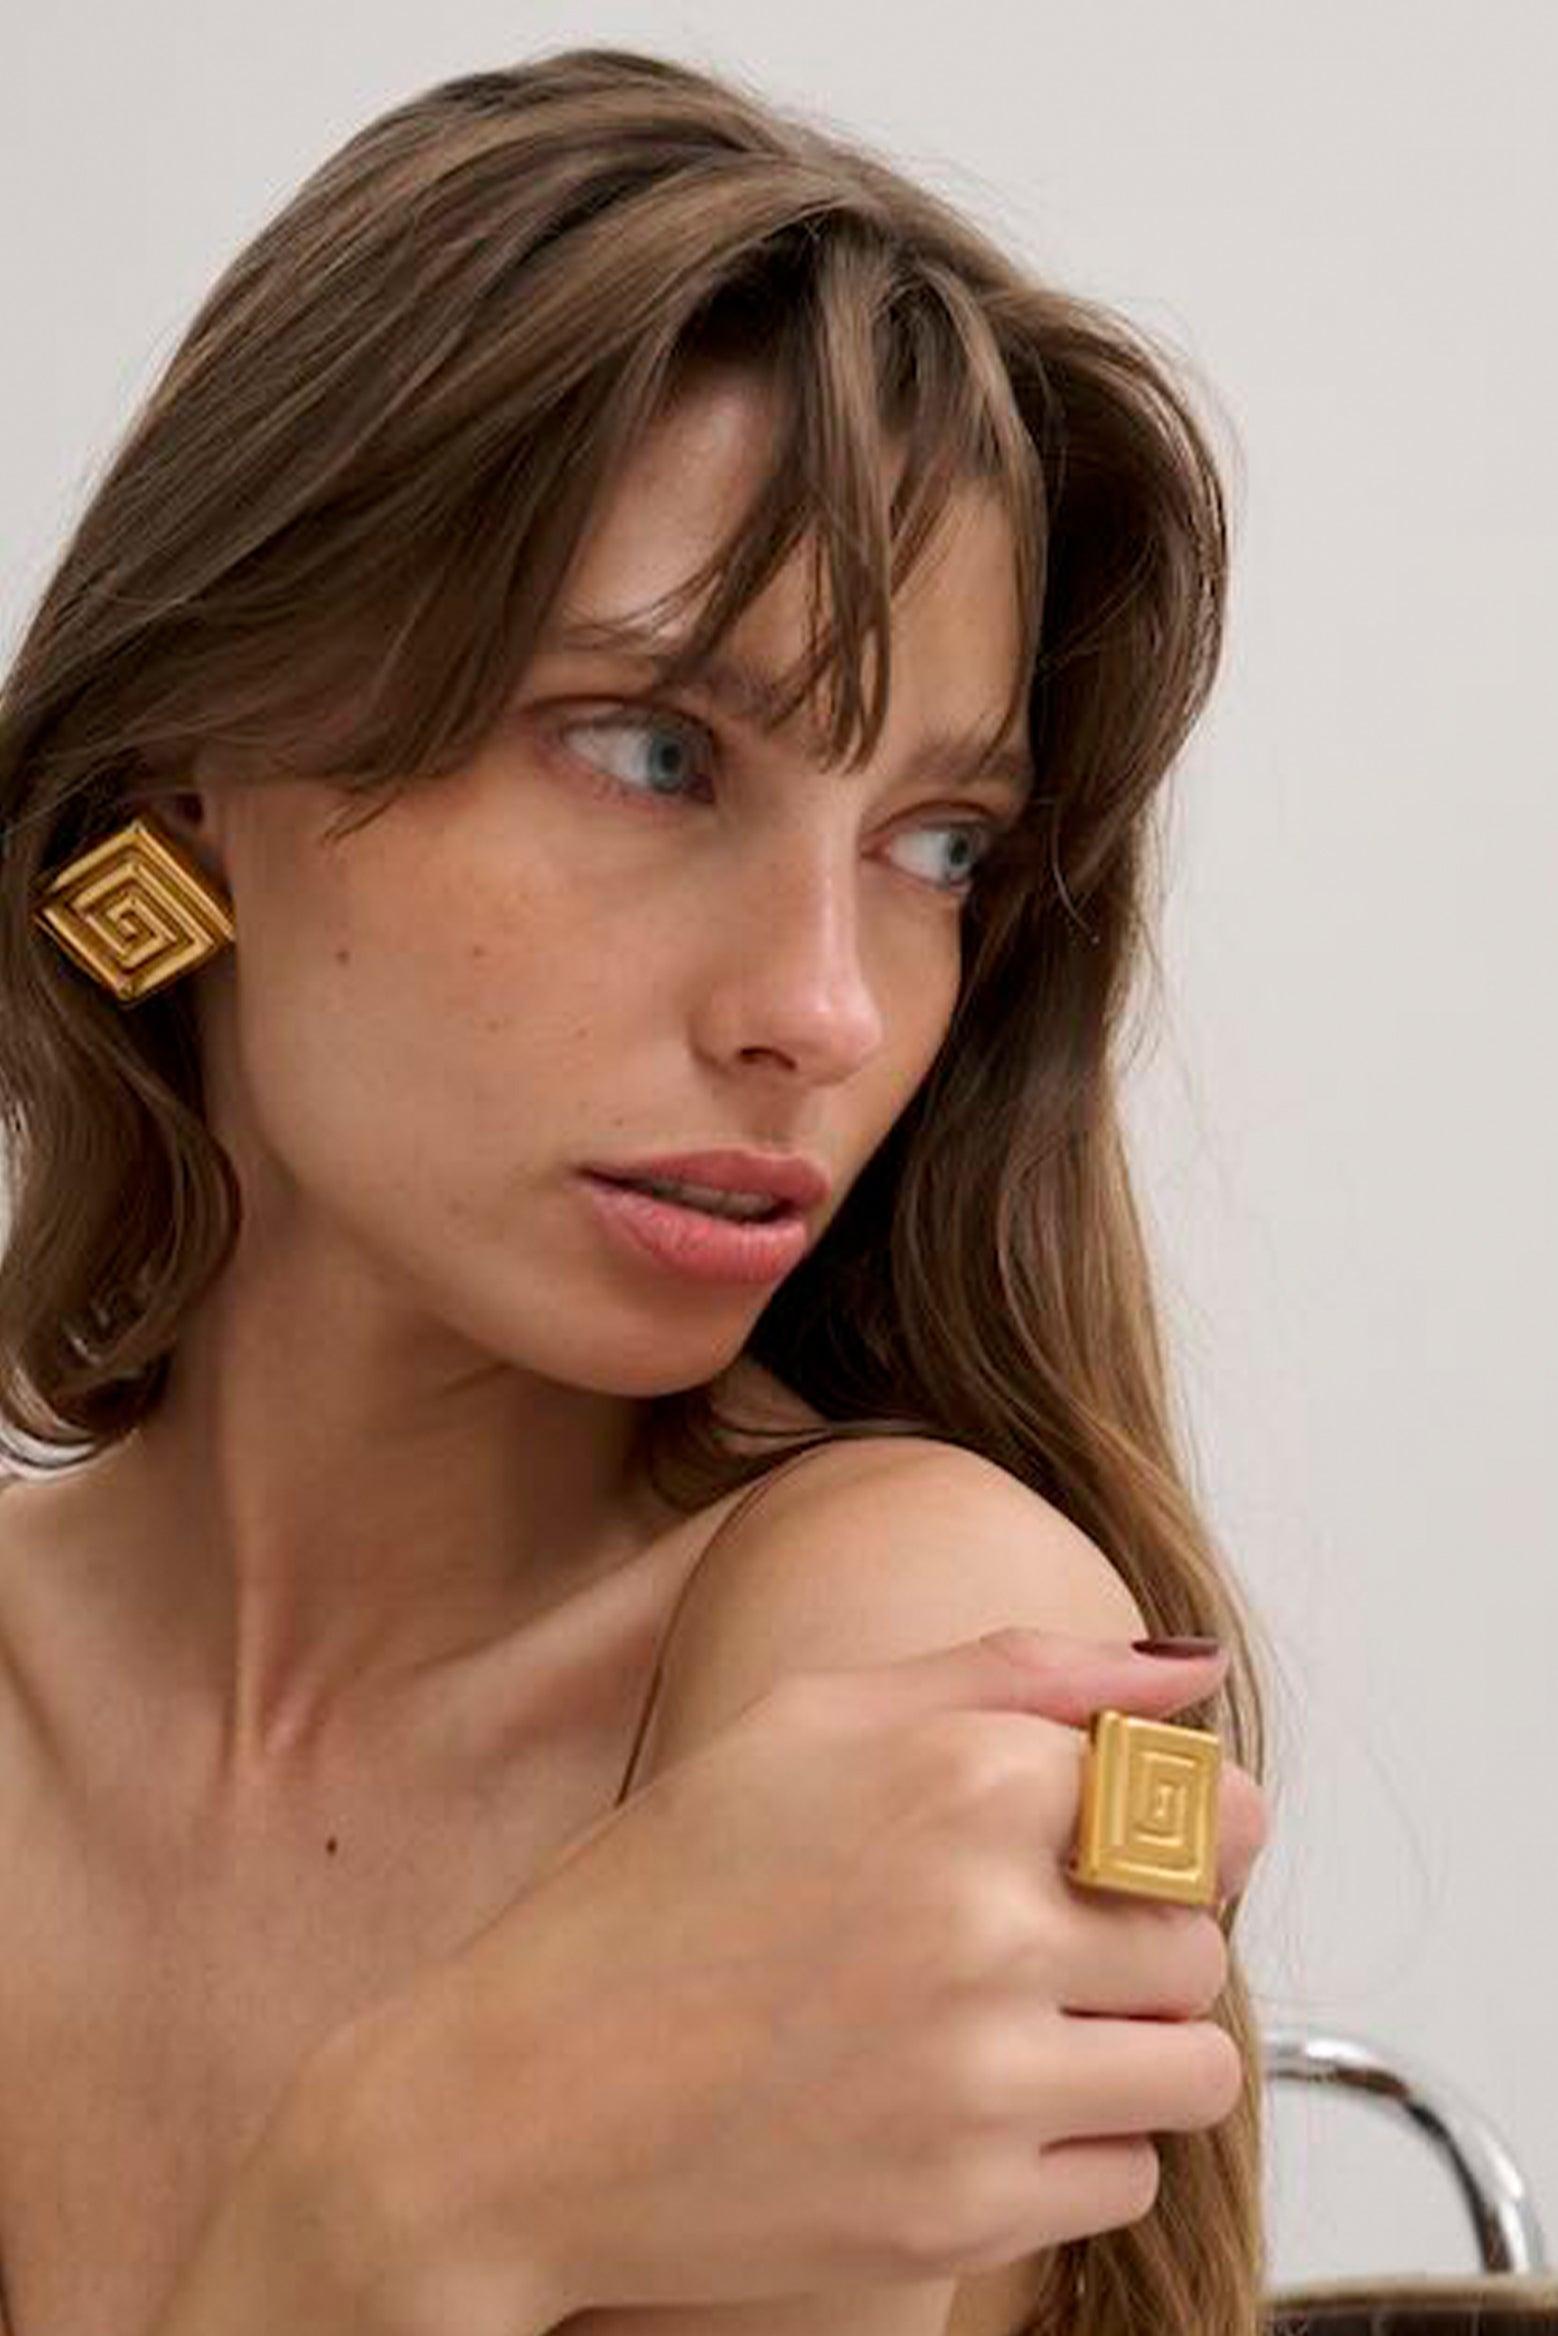 Anna Rossi Labyrinth Earrings in Gold available at The New Trend Australia.